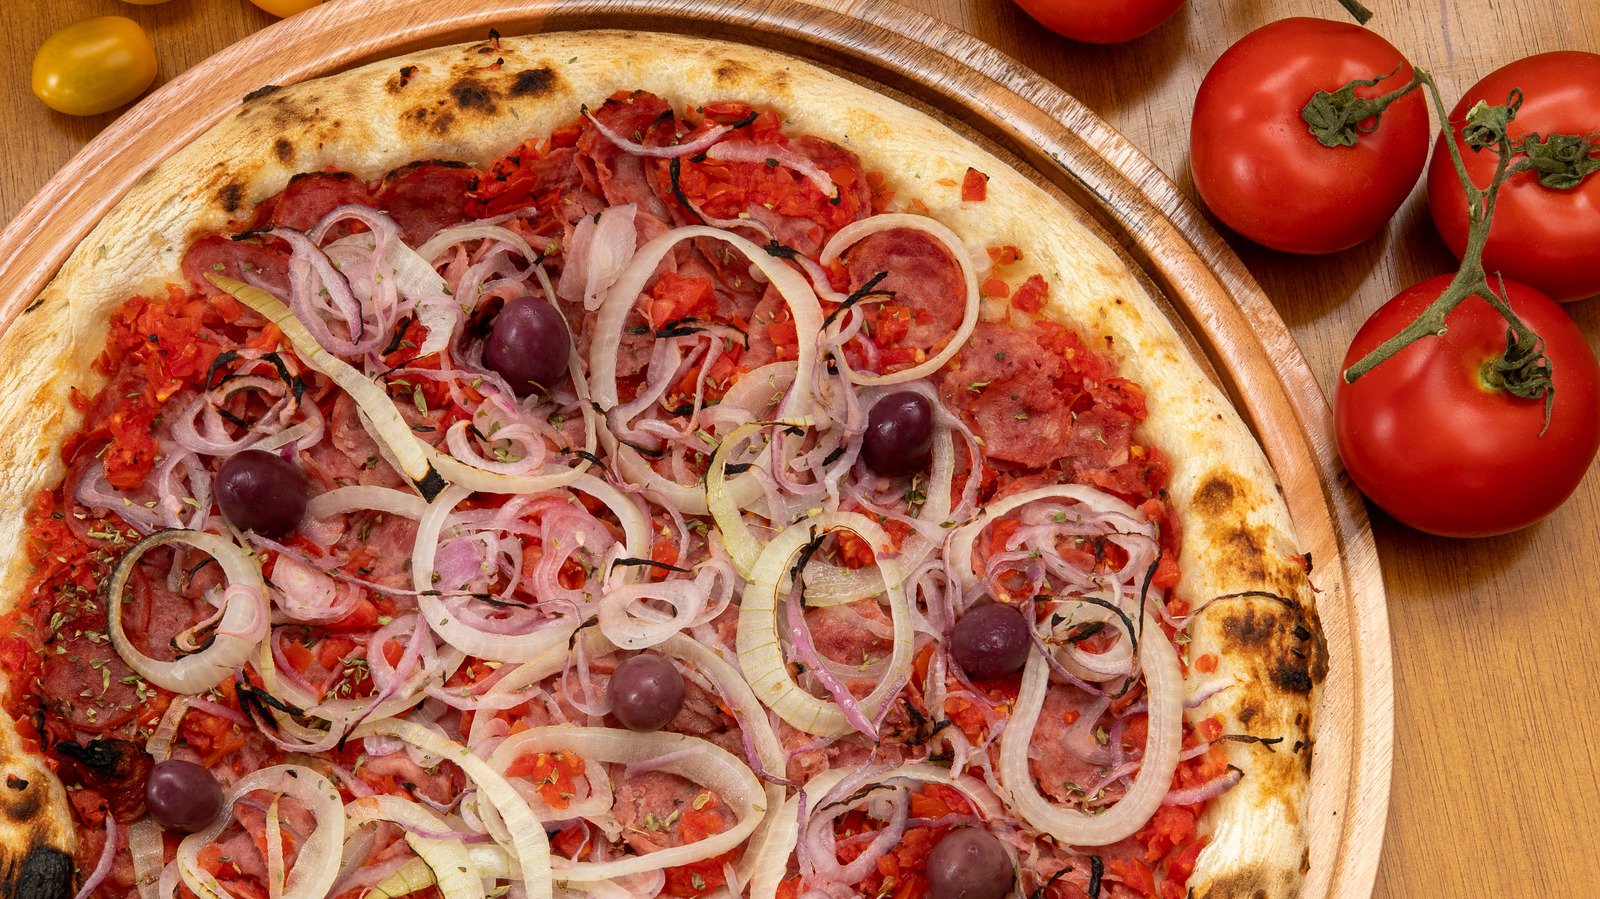 What Makes Calabrian-Style Pizza So Unique?